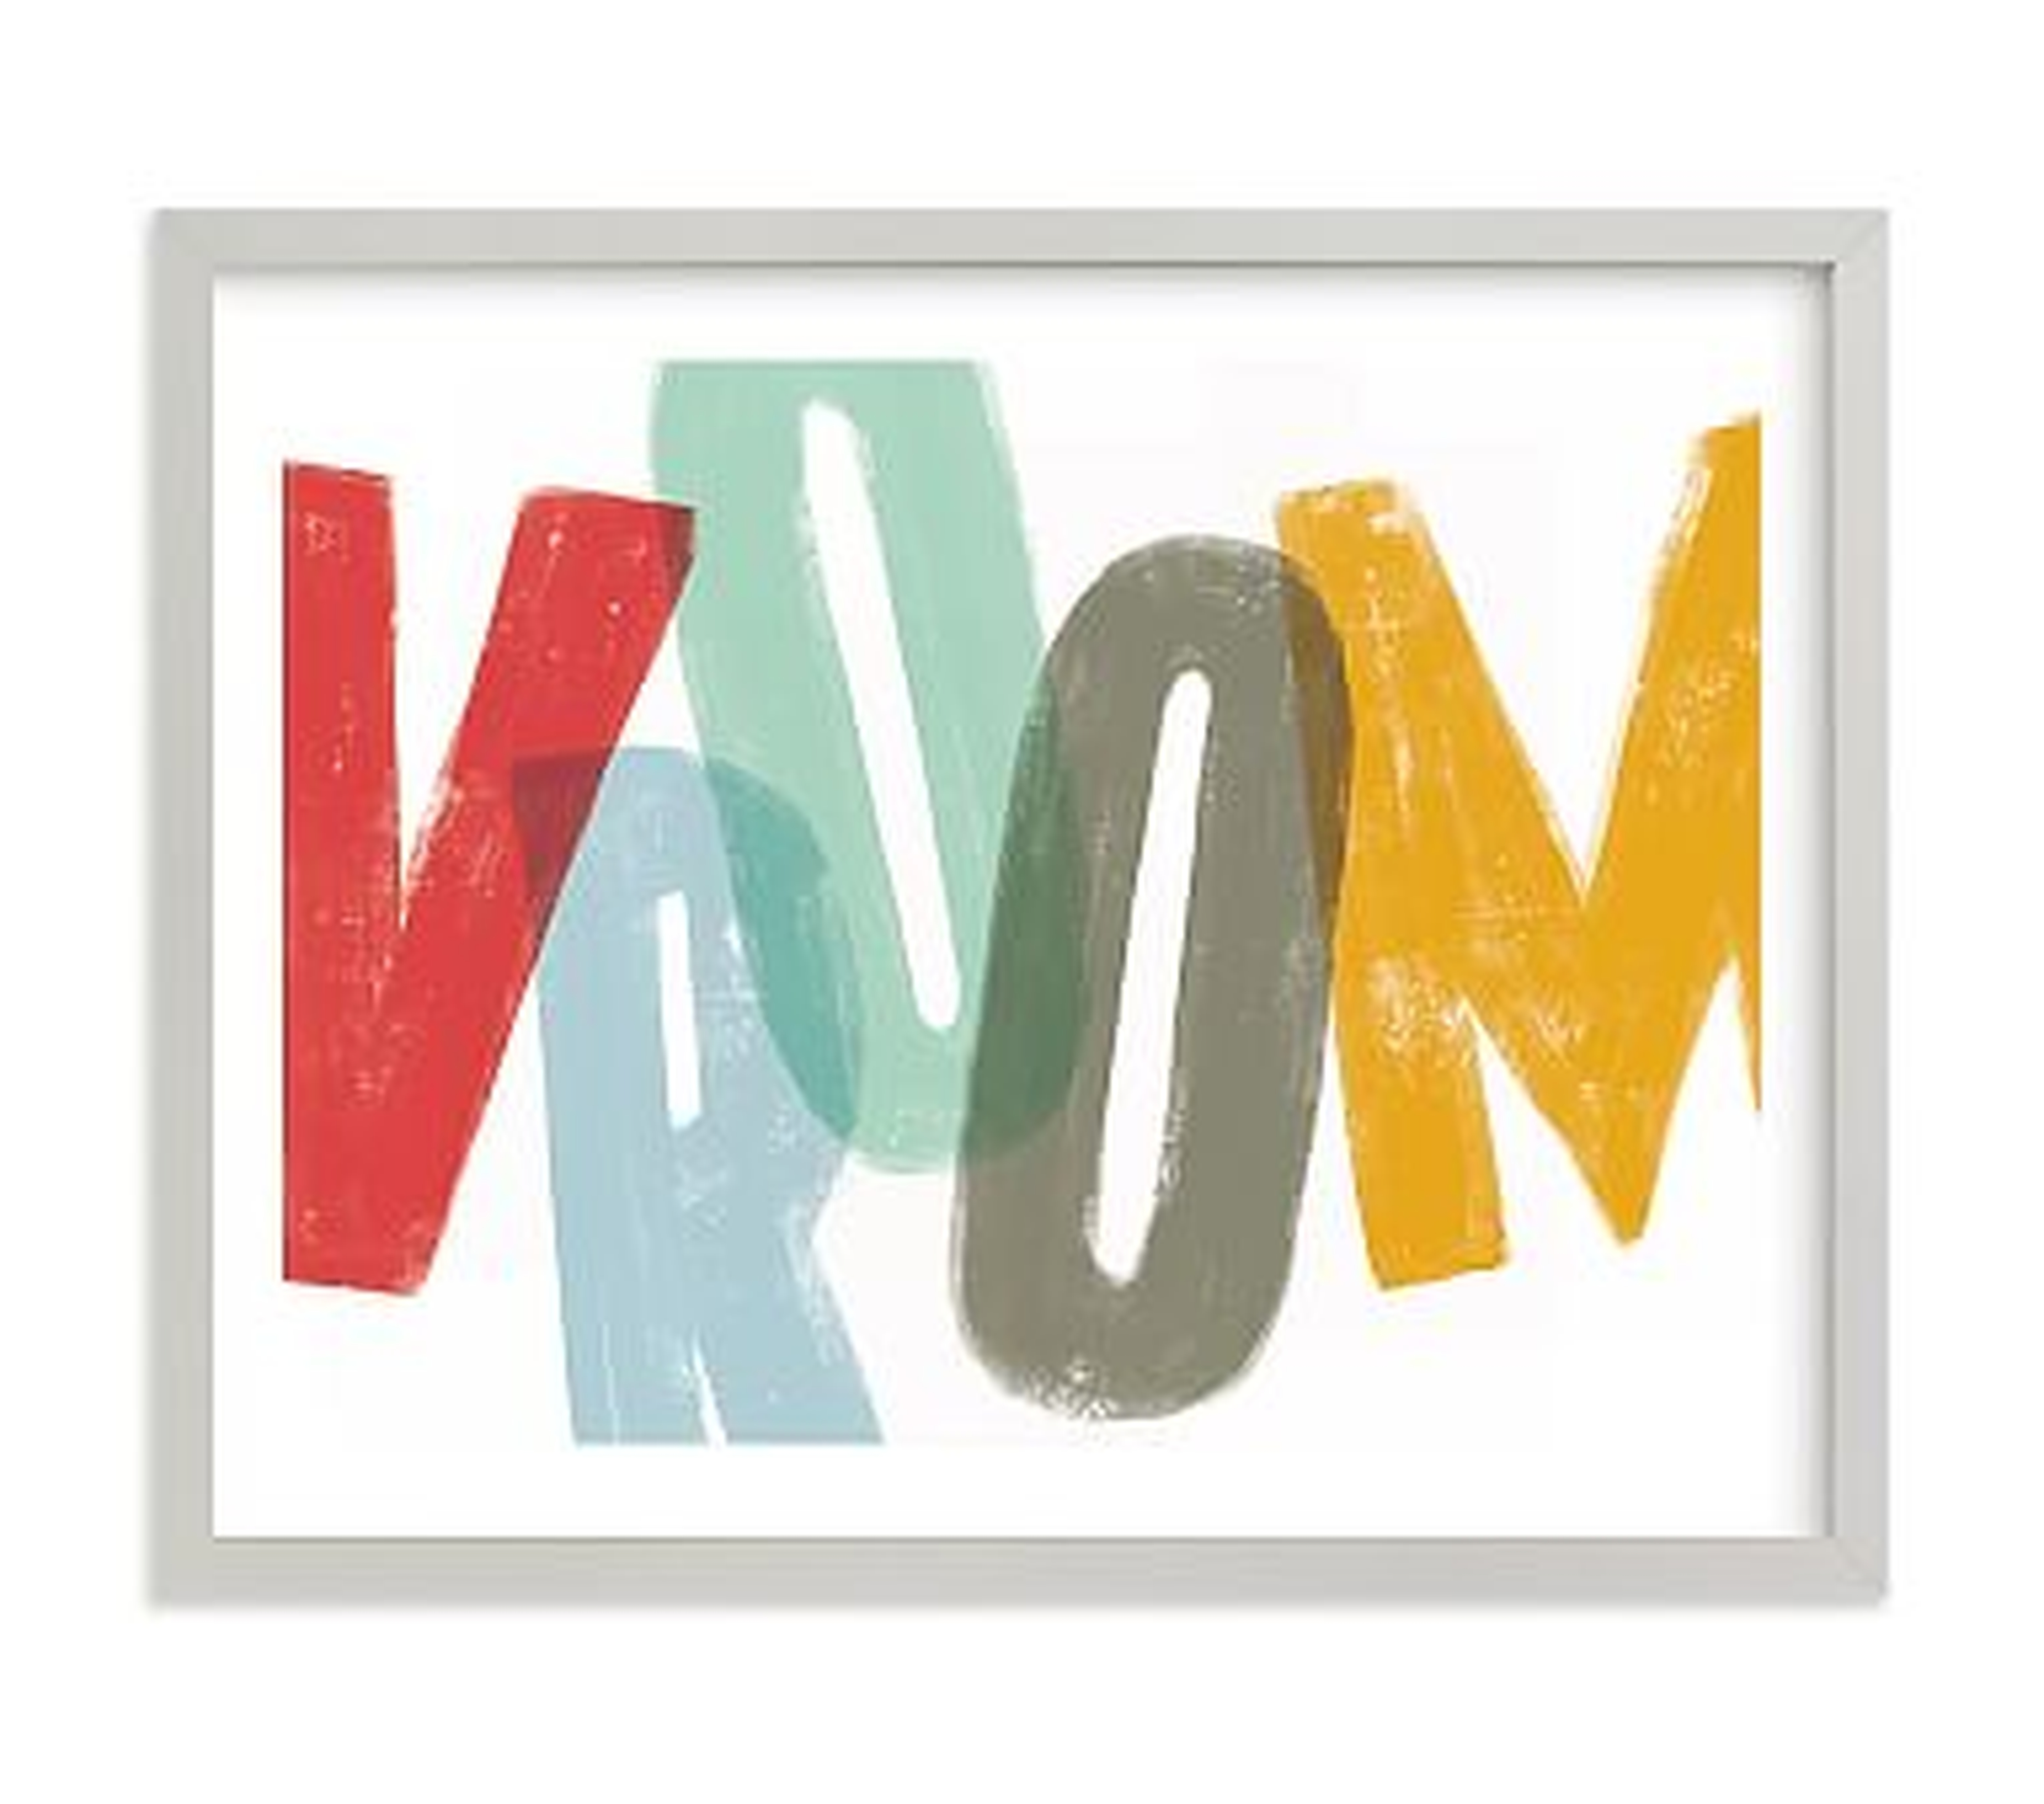 Vroom Wall Art by Minted(R), 14x11, Gray - Pottery Barn Kids